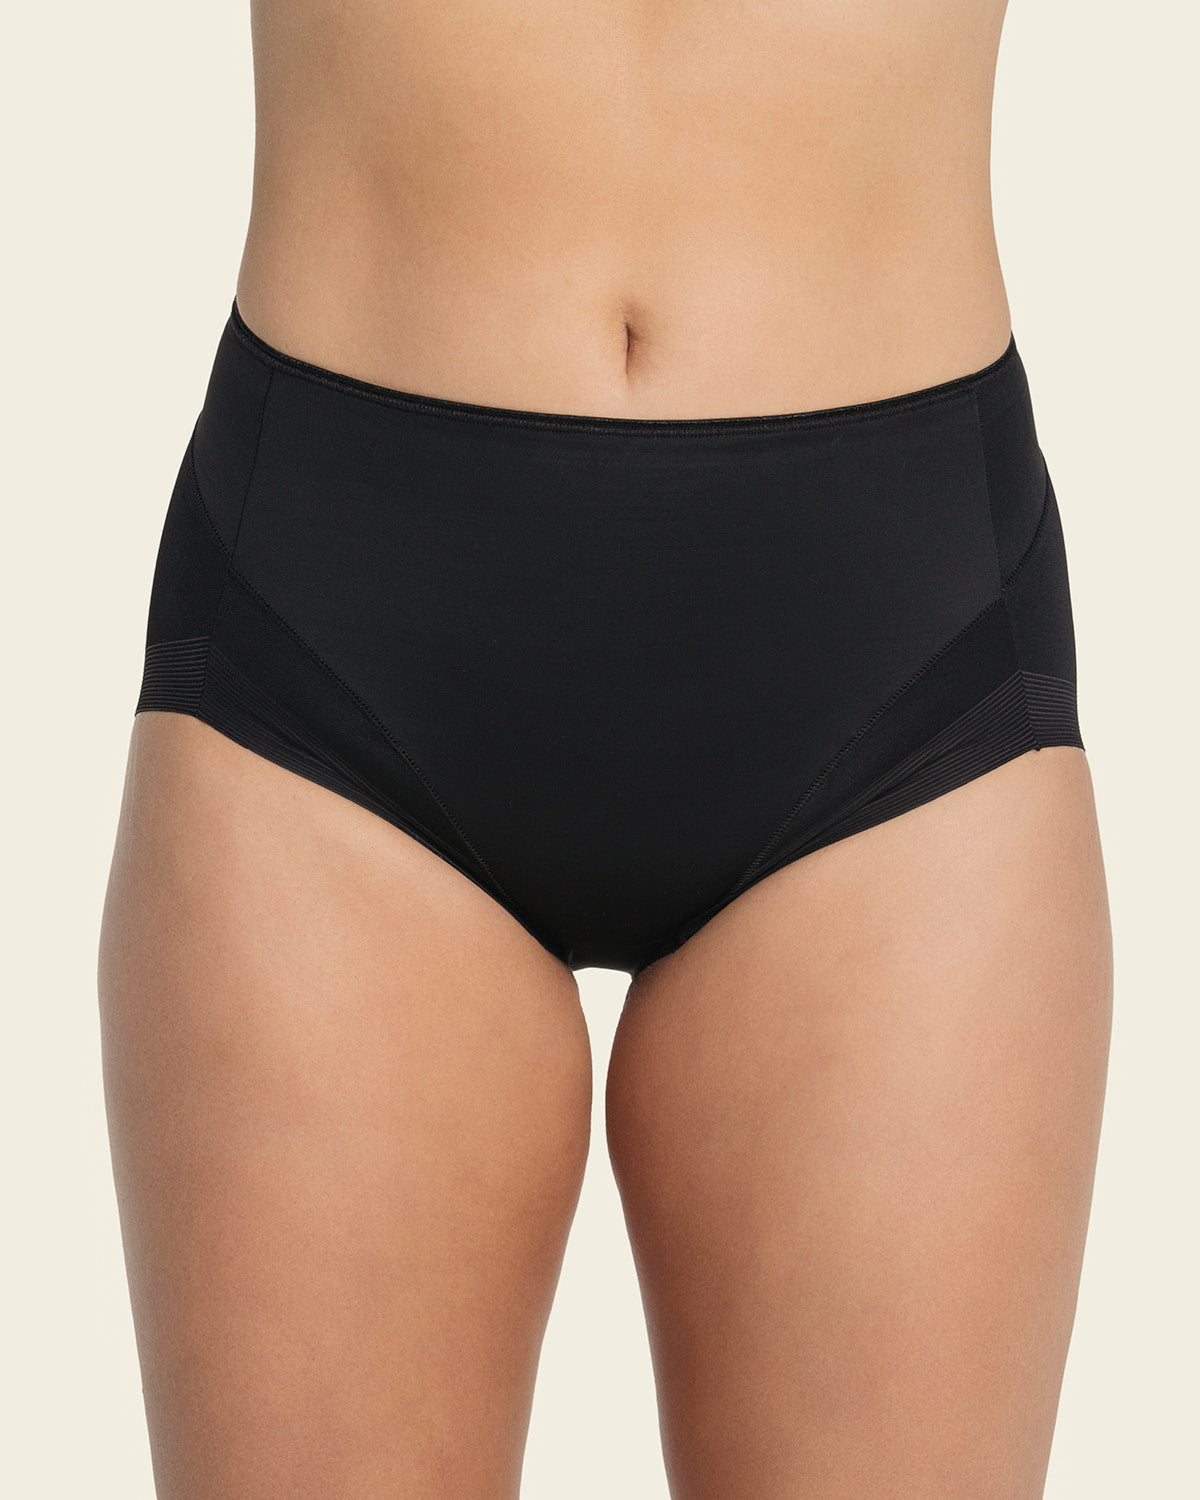 High-Waisted Girdle in Black – Perfect Silhouette